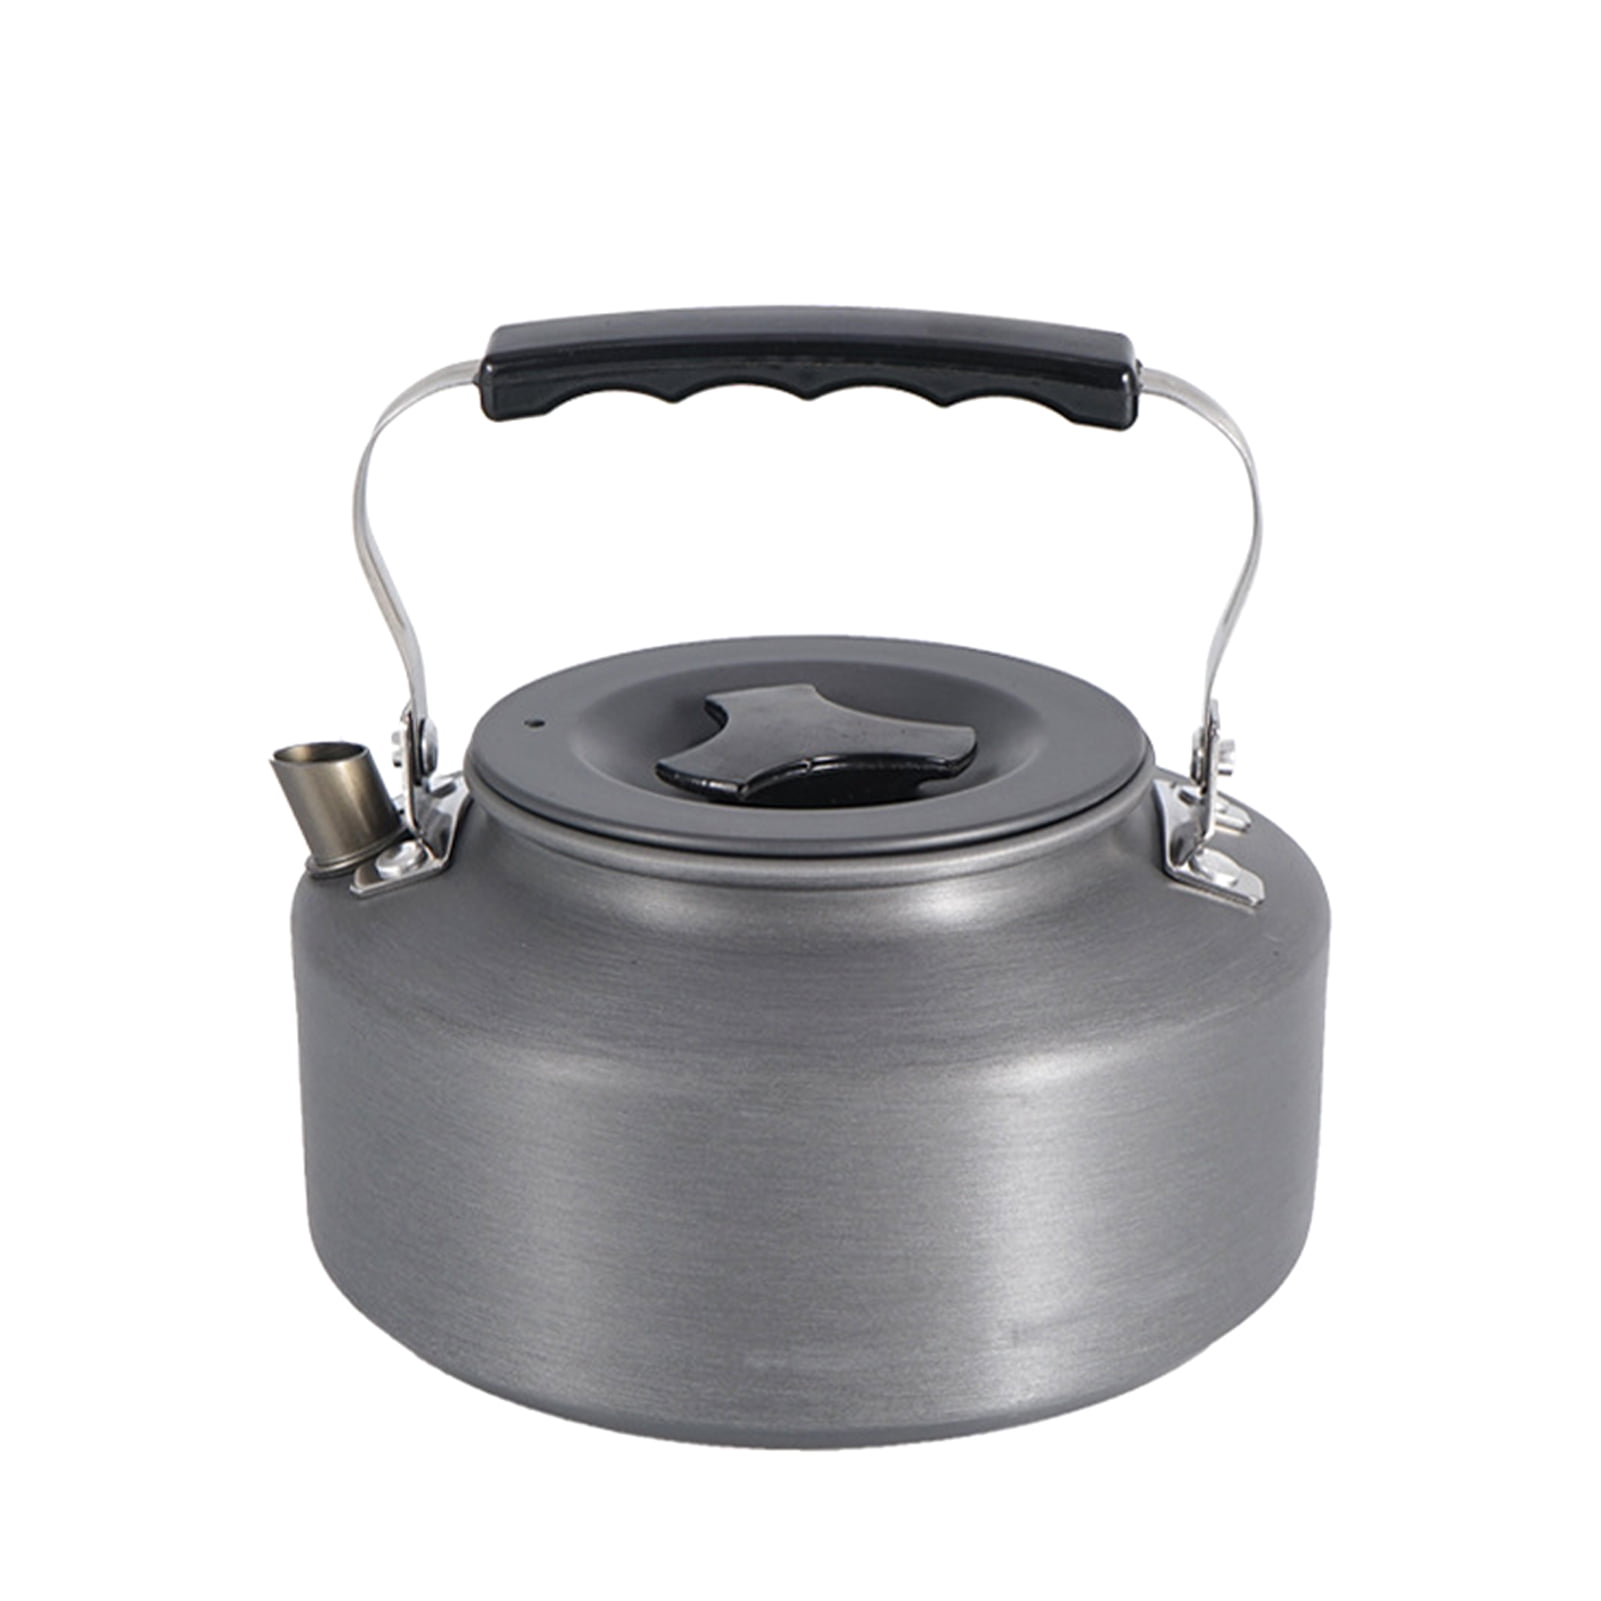 Outdoor 1.1L Camping Teapot Stainless Steel Hiking Picnic Coffee Tea Pot Kettle 